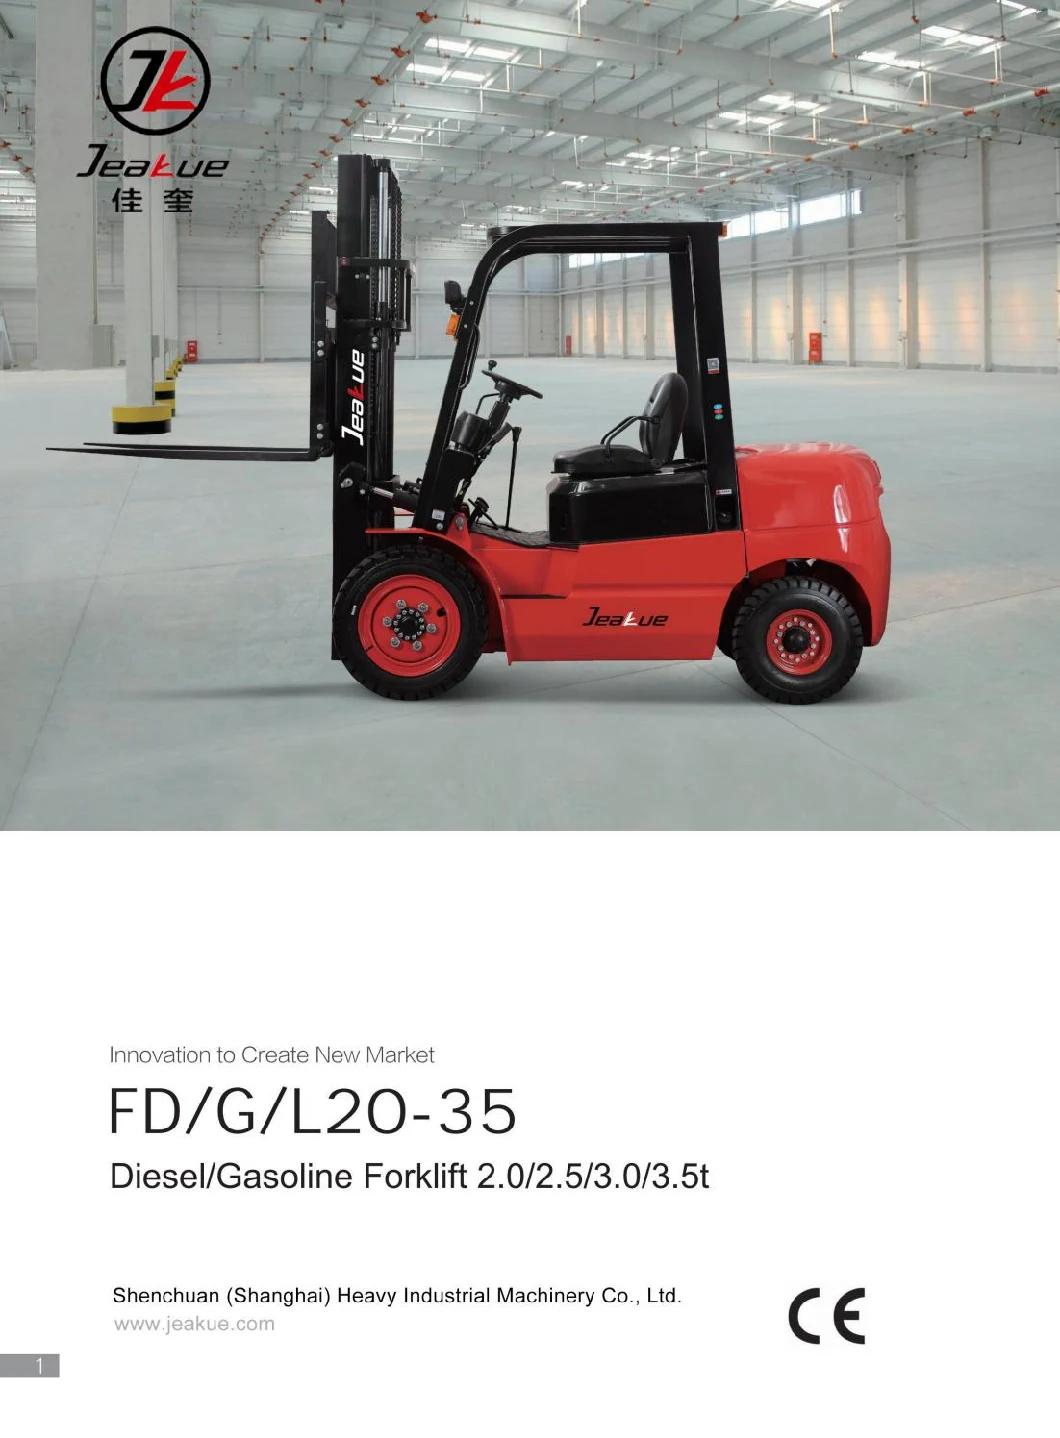 China Forklift High Quality 2 T 2.5 T 3 T 3.5 T Lift Height 3 M 4 M 5 M 6 M New Design Diesel Forklift